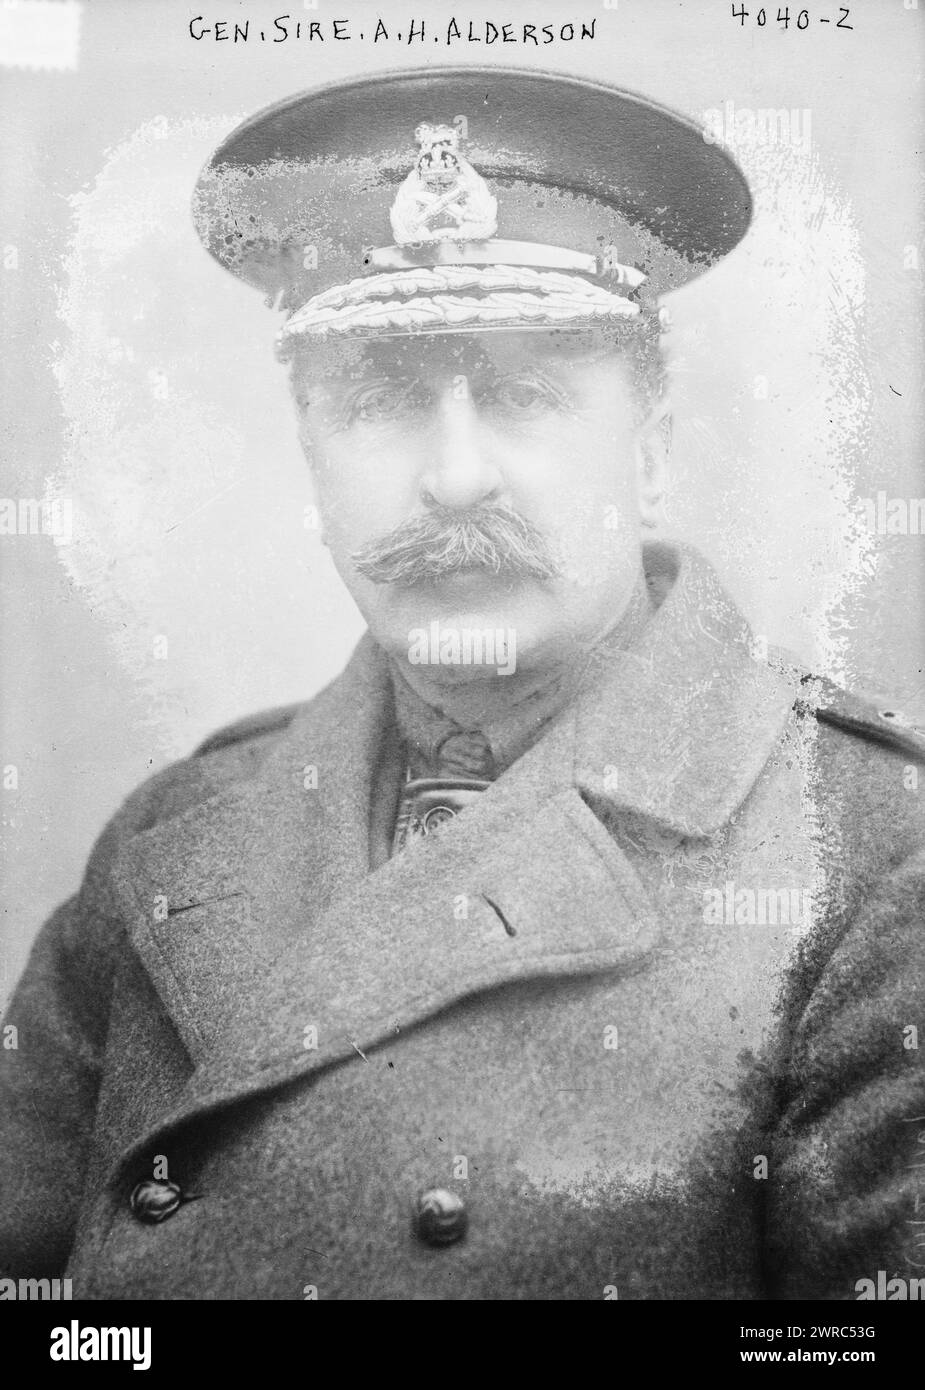 Gen. Sir E.A.H. Alderson, Photograph shows Lieutenant General Sir Edwin Alfred Hervey Alderson, (1859-1927) a British Army officer who served in many conflicts including World War I., between ca. 1915 and ca. 1920, Glass negatives, 1 negative: glass Stock Photo